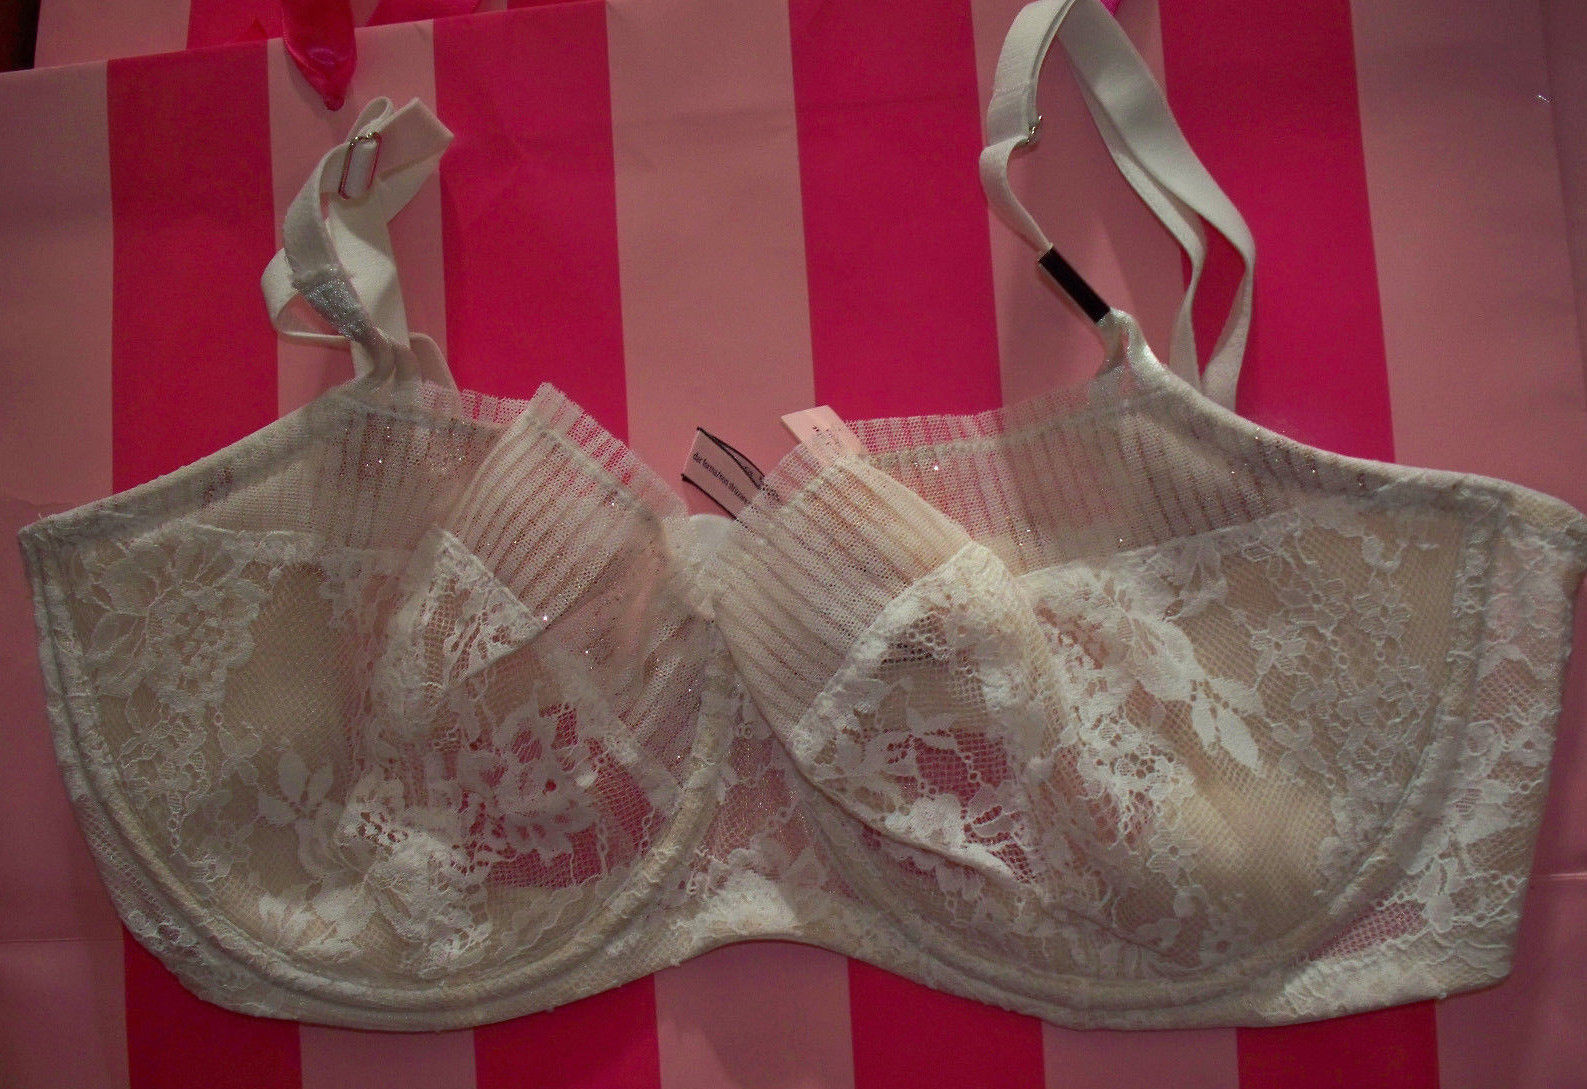  Victorias Secret Dream Angels Wicked Lace